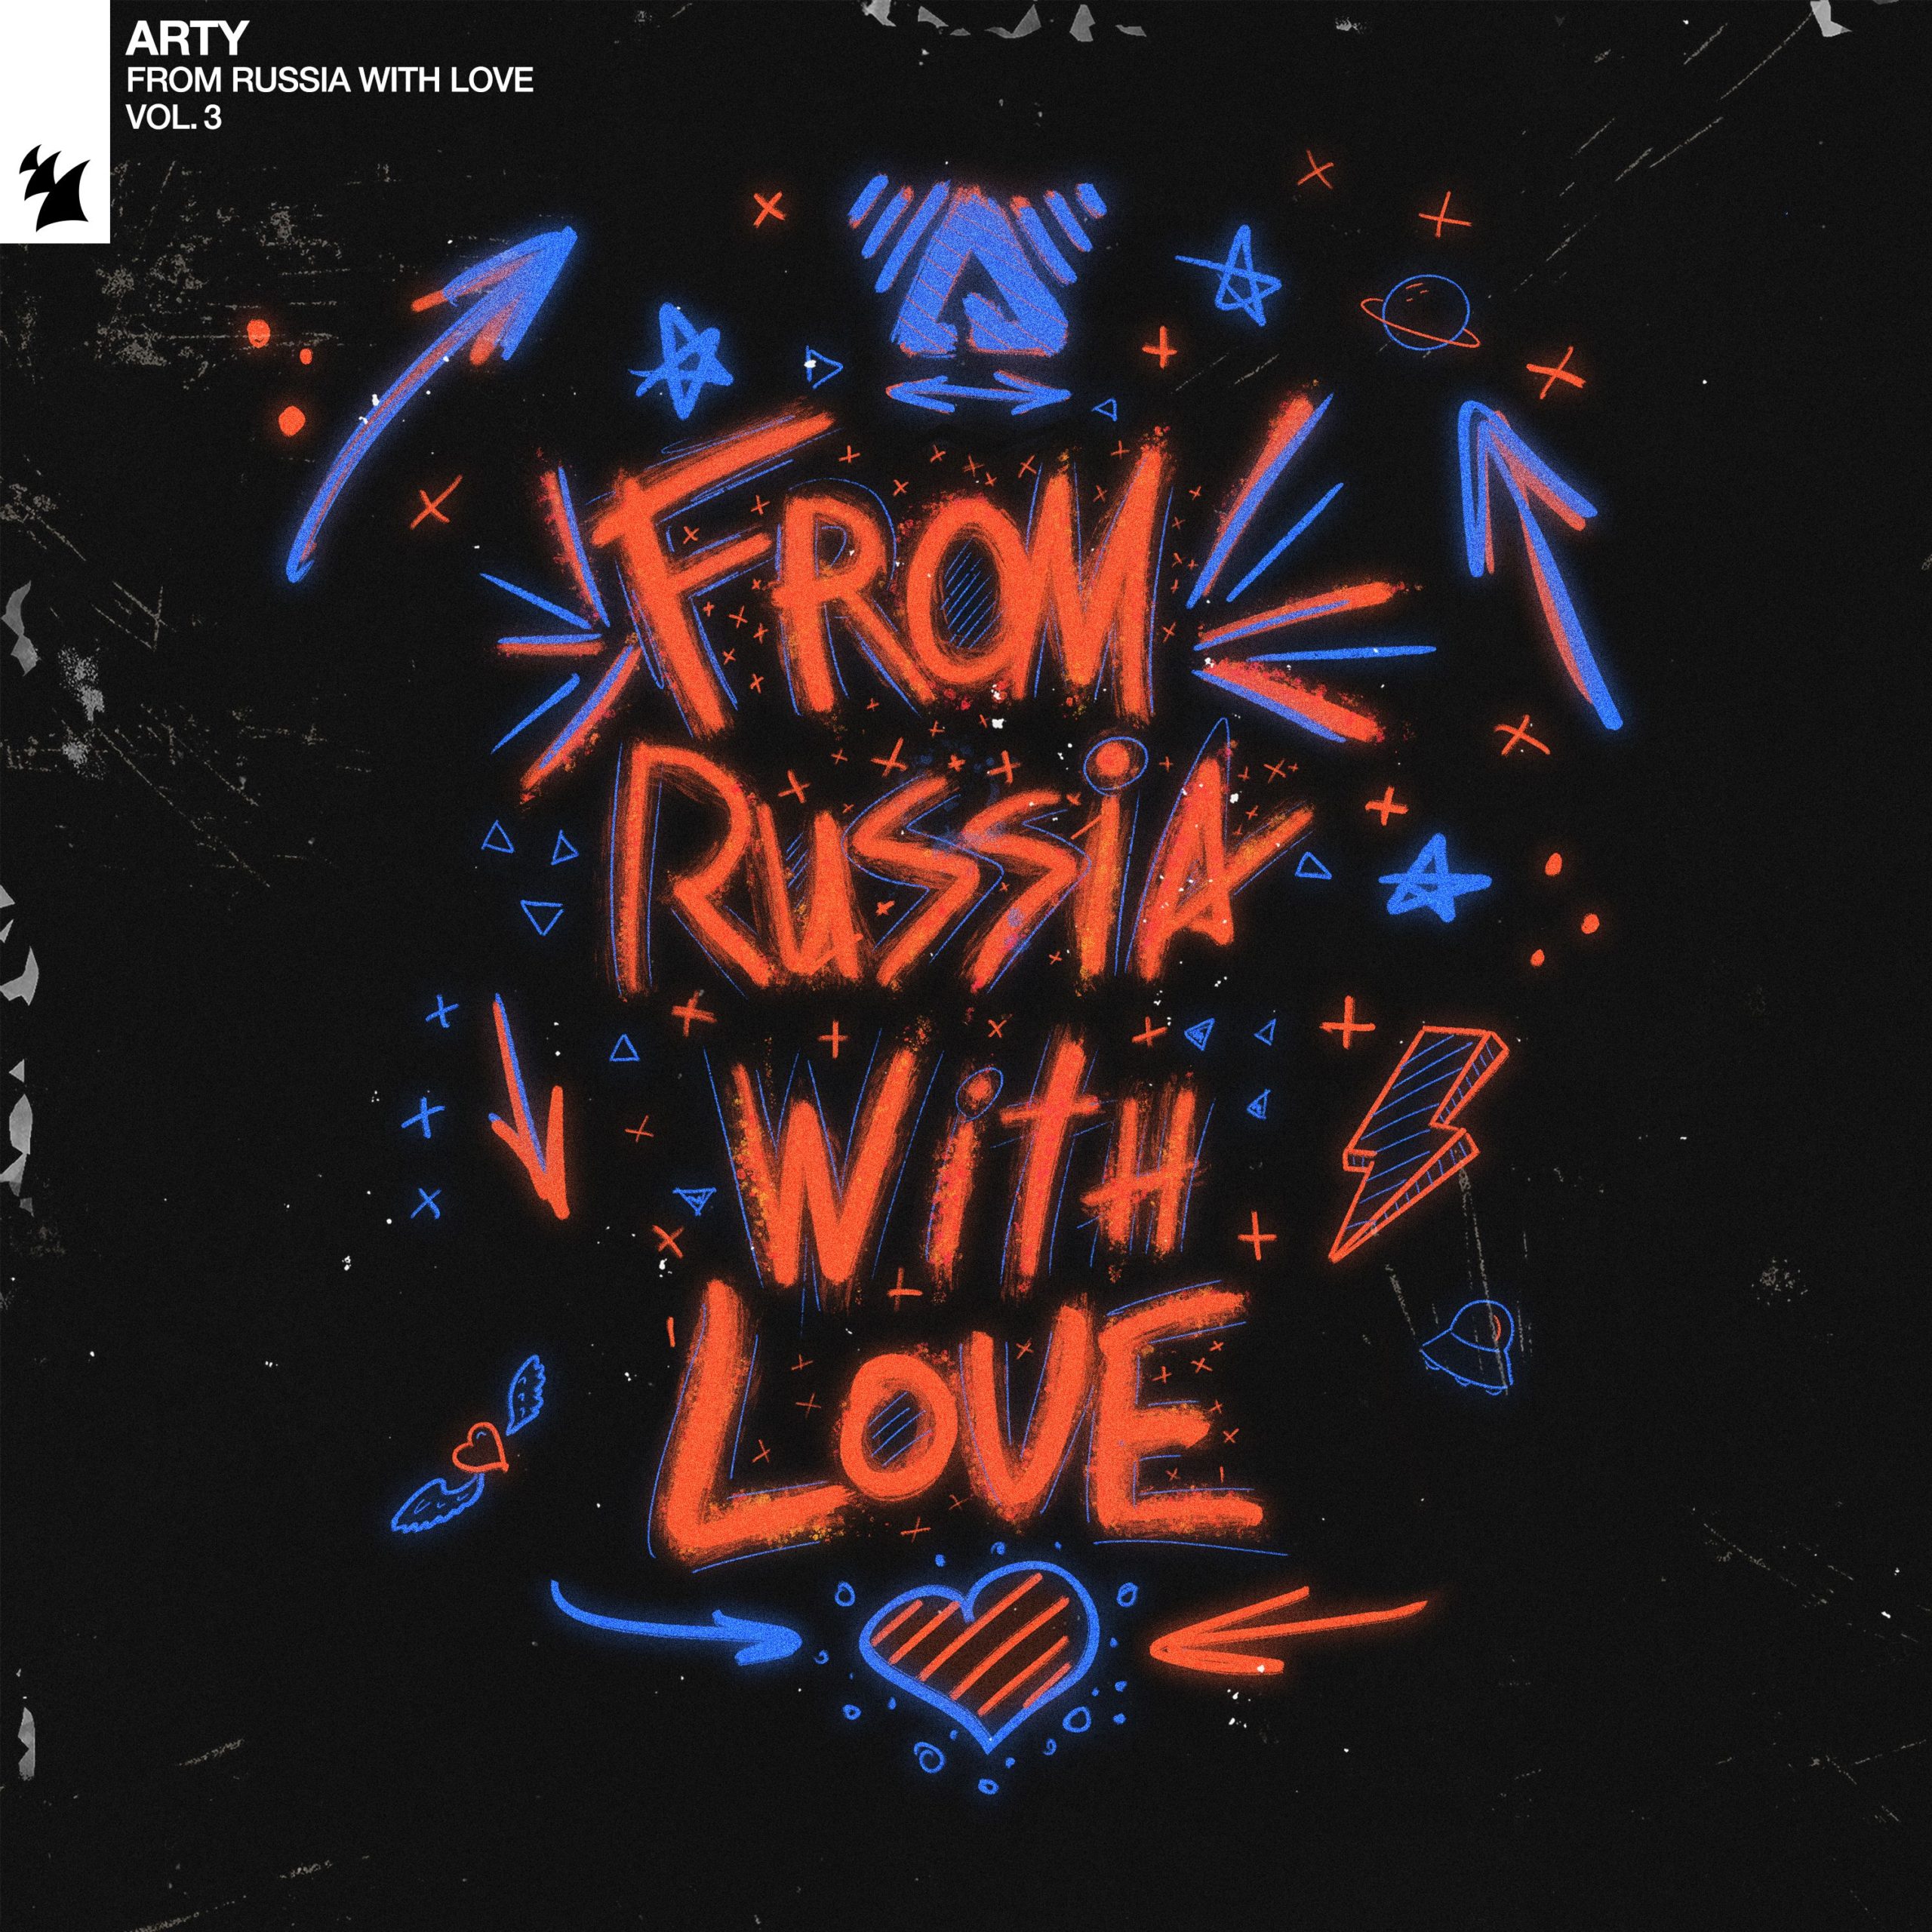 ARTY presents From Russia With Love volume 3 on Armada Music